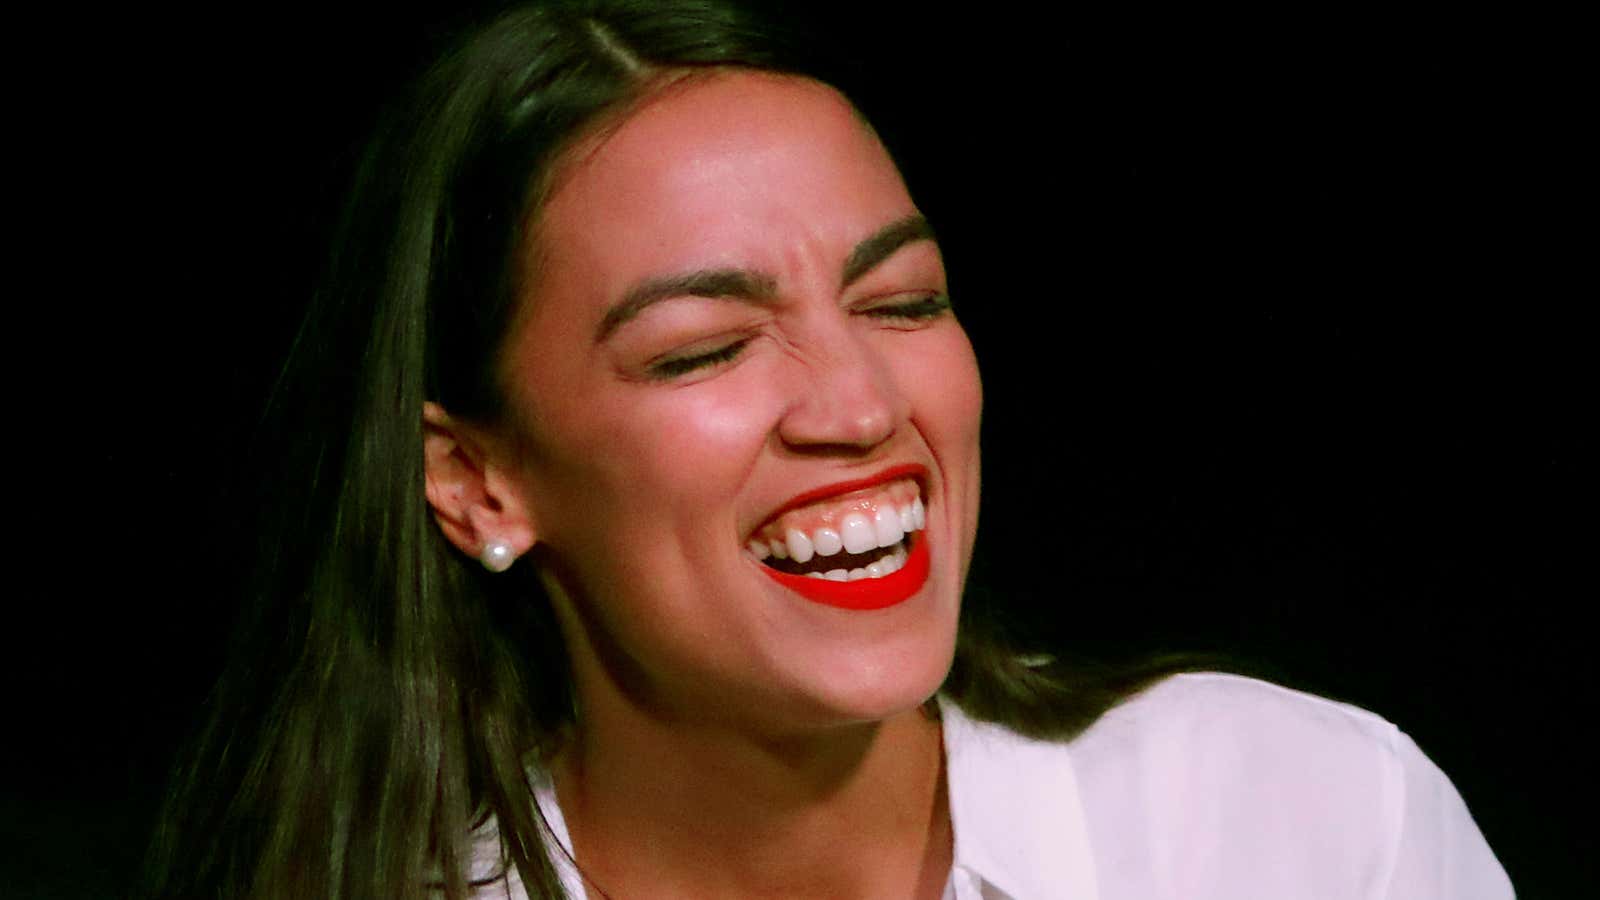 Alexandria Ocasio-Cortez is not so worried about debt and deficits